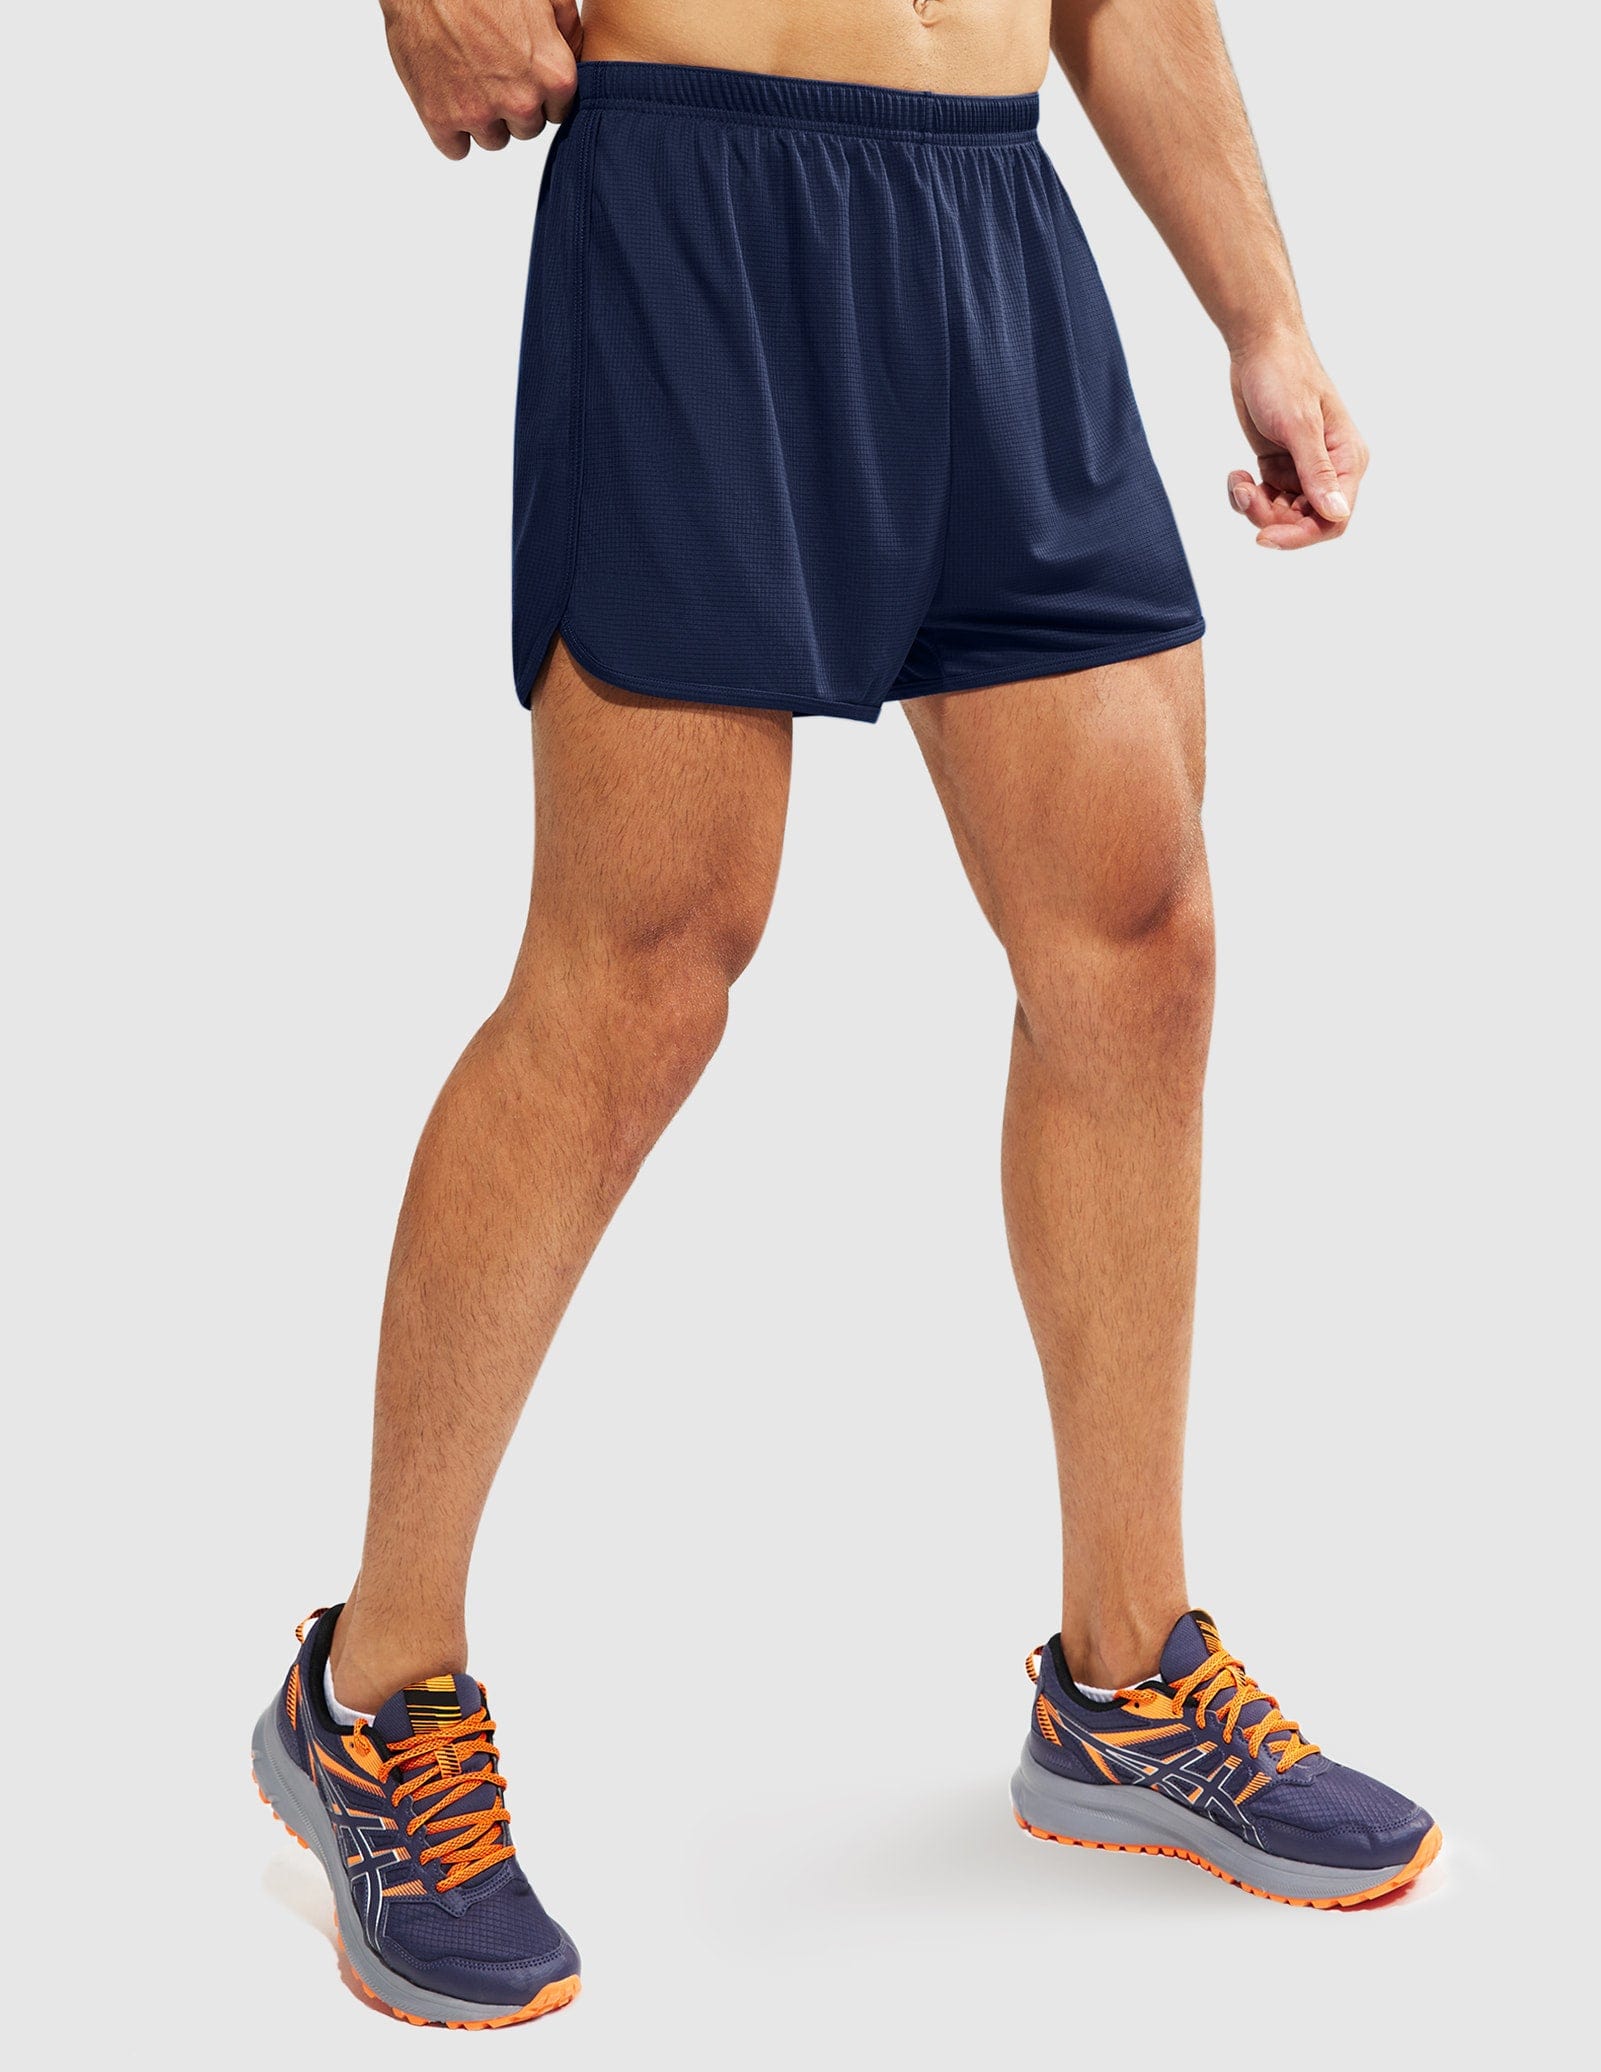 Men's 3-Inch Quick Dry Running Shorts with Liner Men's Shorts Dark Blue / M MIER